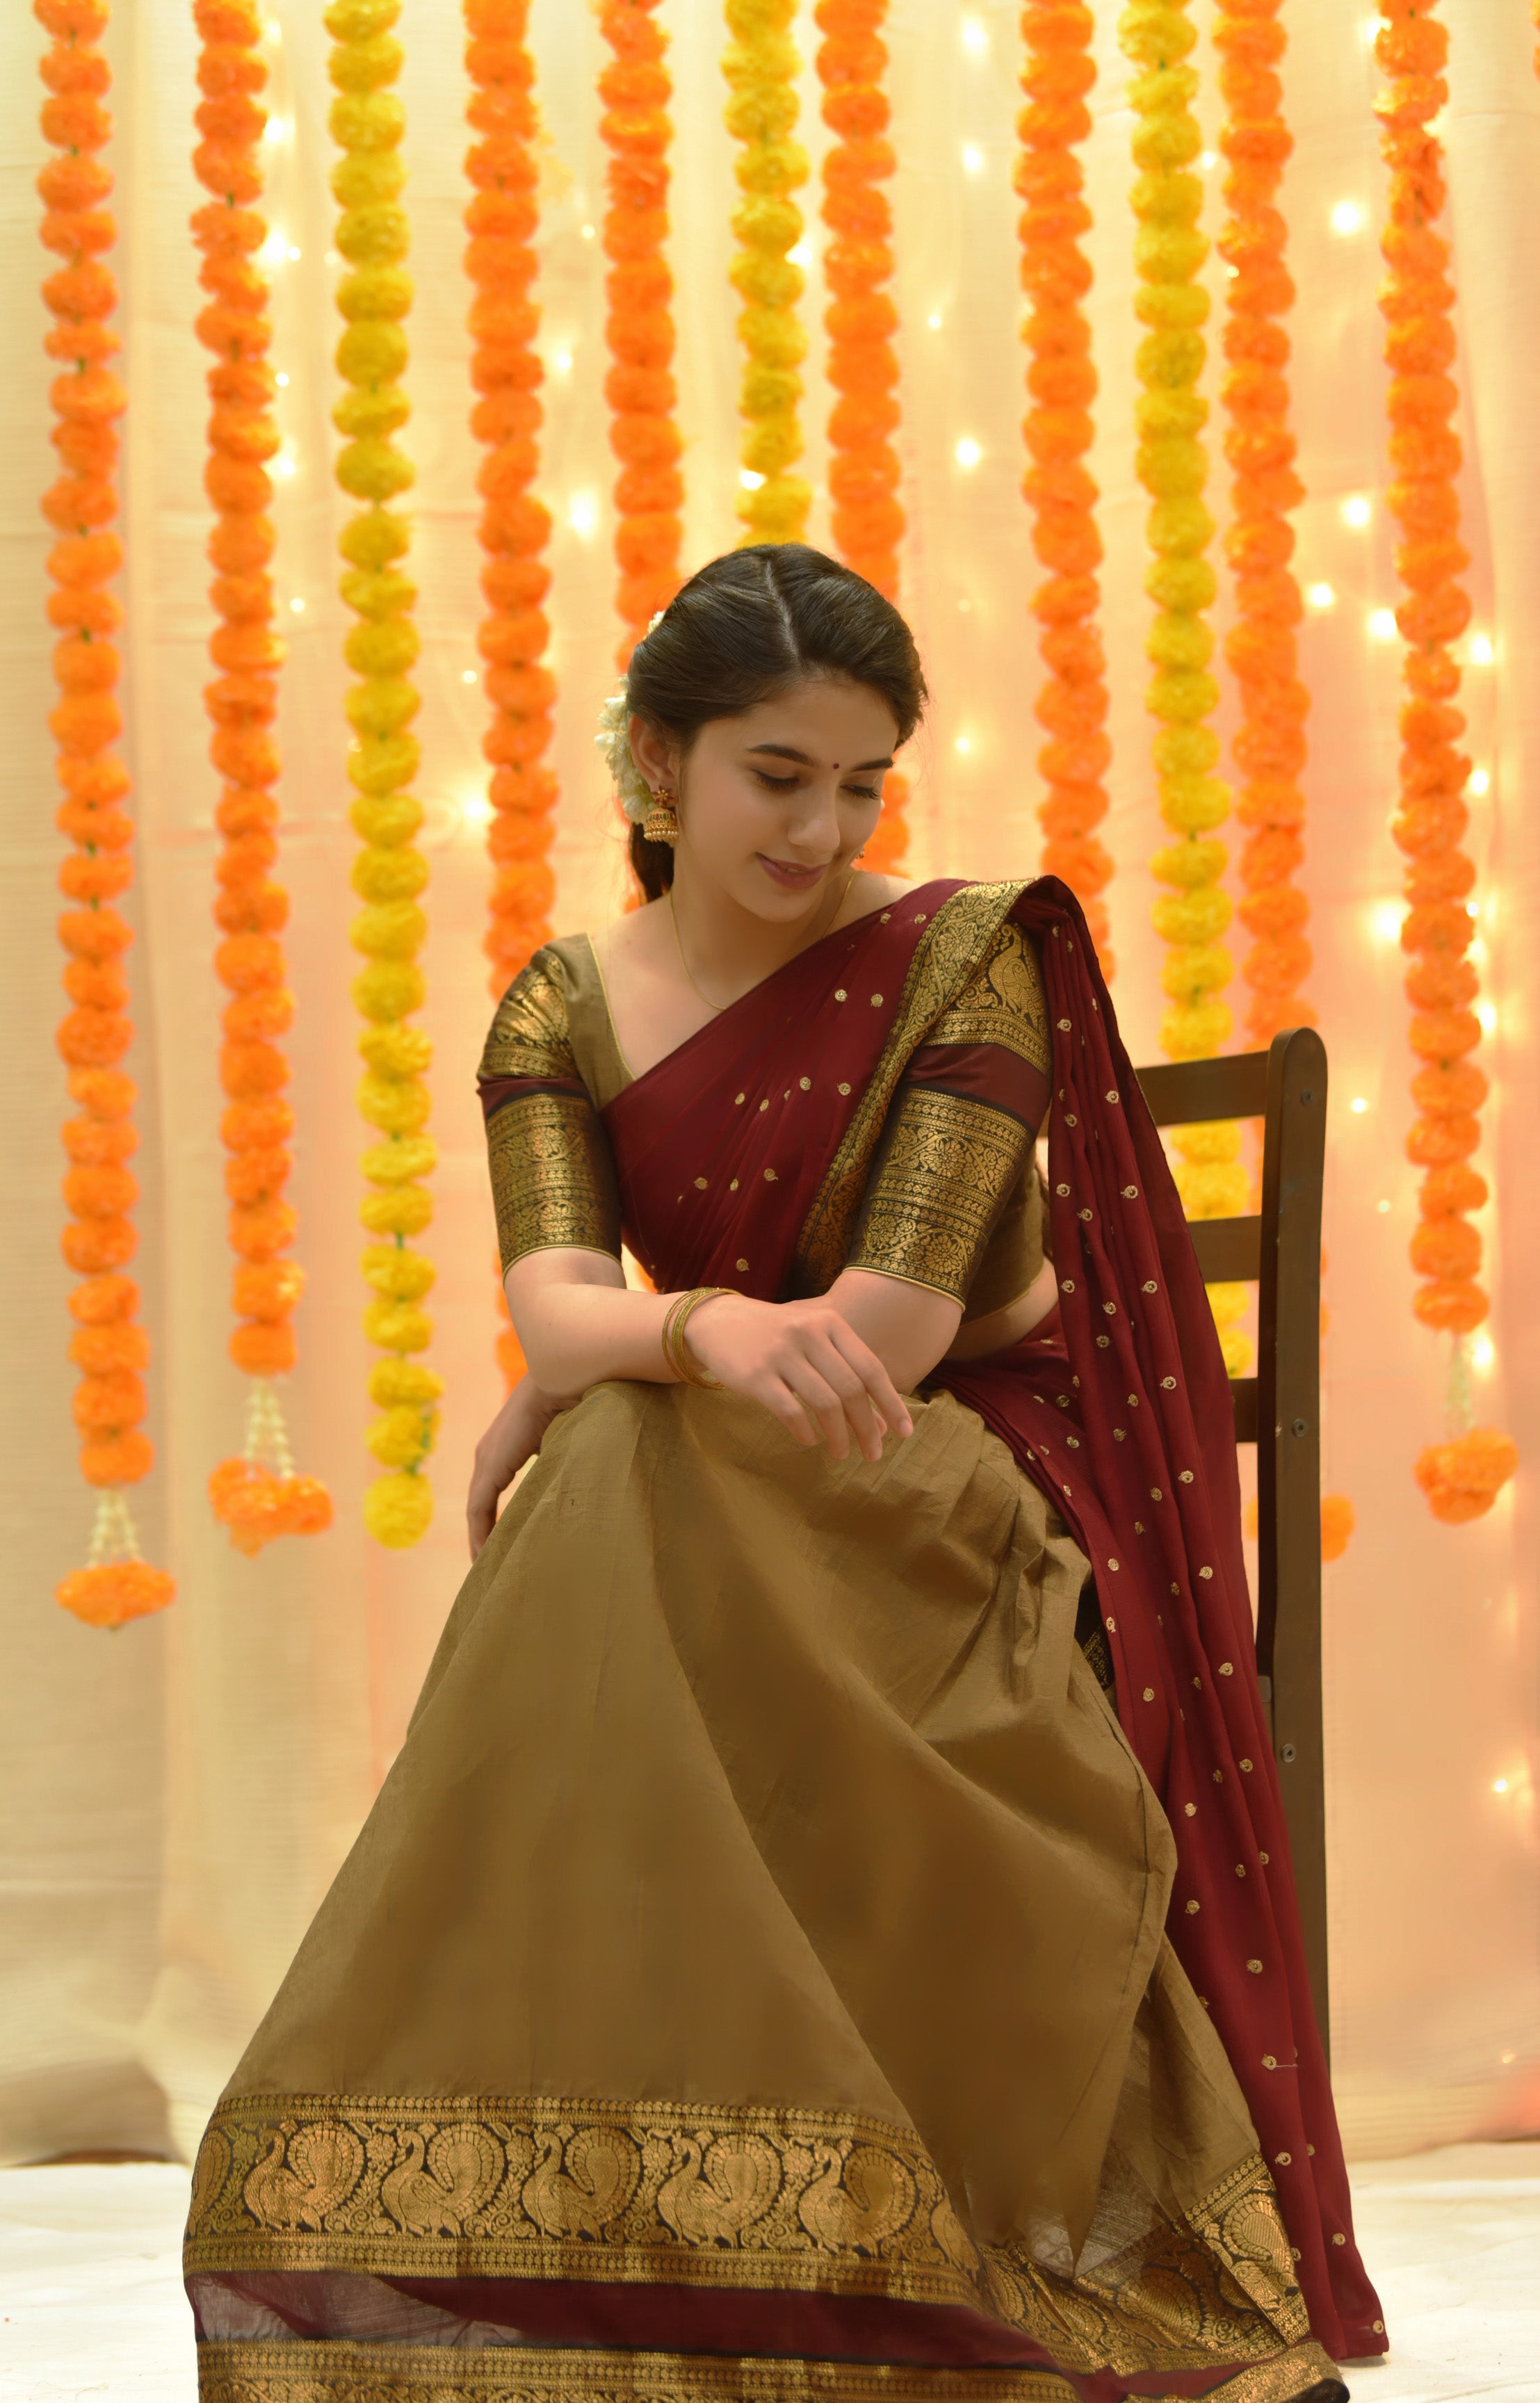 Explore our stunning collection of Indian traditional half sarees. Choose from ready-to-wear sarees, traditional off sarees, party wear sarees, fancy sarees, and more. Perfect for any special occasion or event. Shop new models and designs at unbeatable prices!